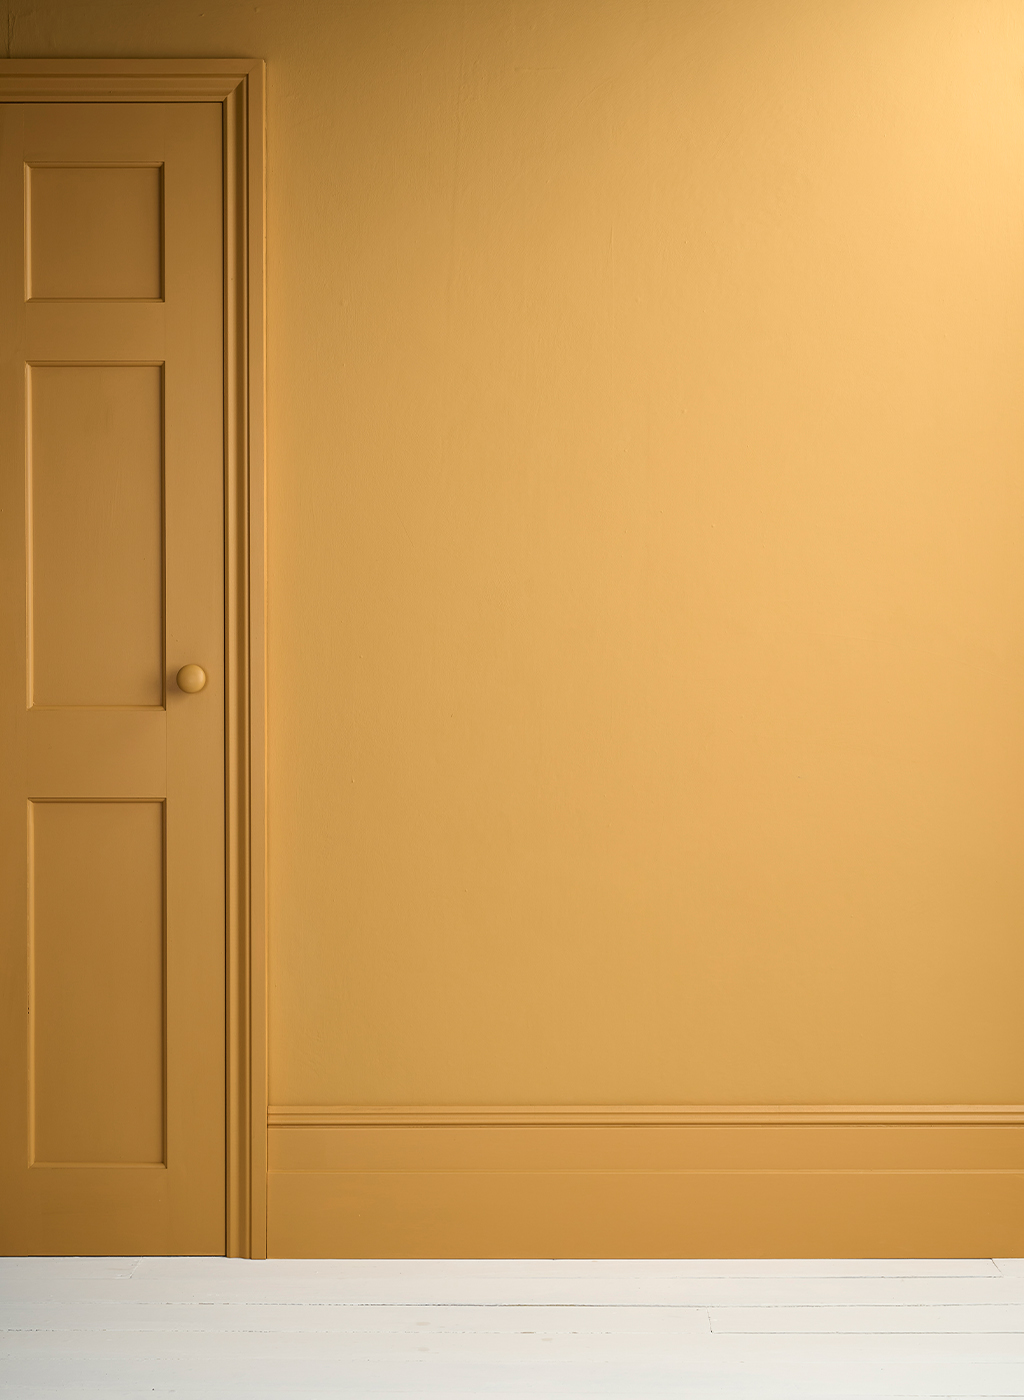 Lifestyle Image of Annie Sloan Satin Paint in Carnaby Yellow used on door and skirting